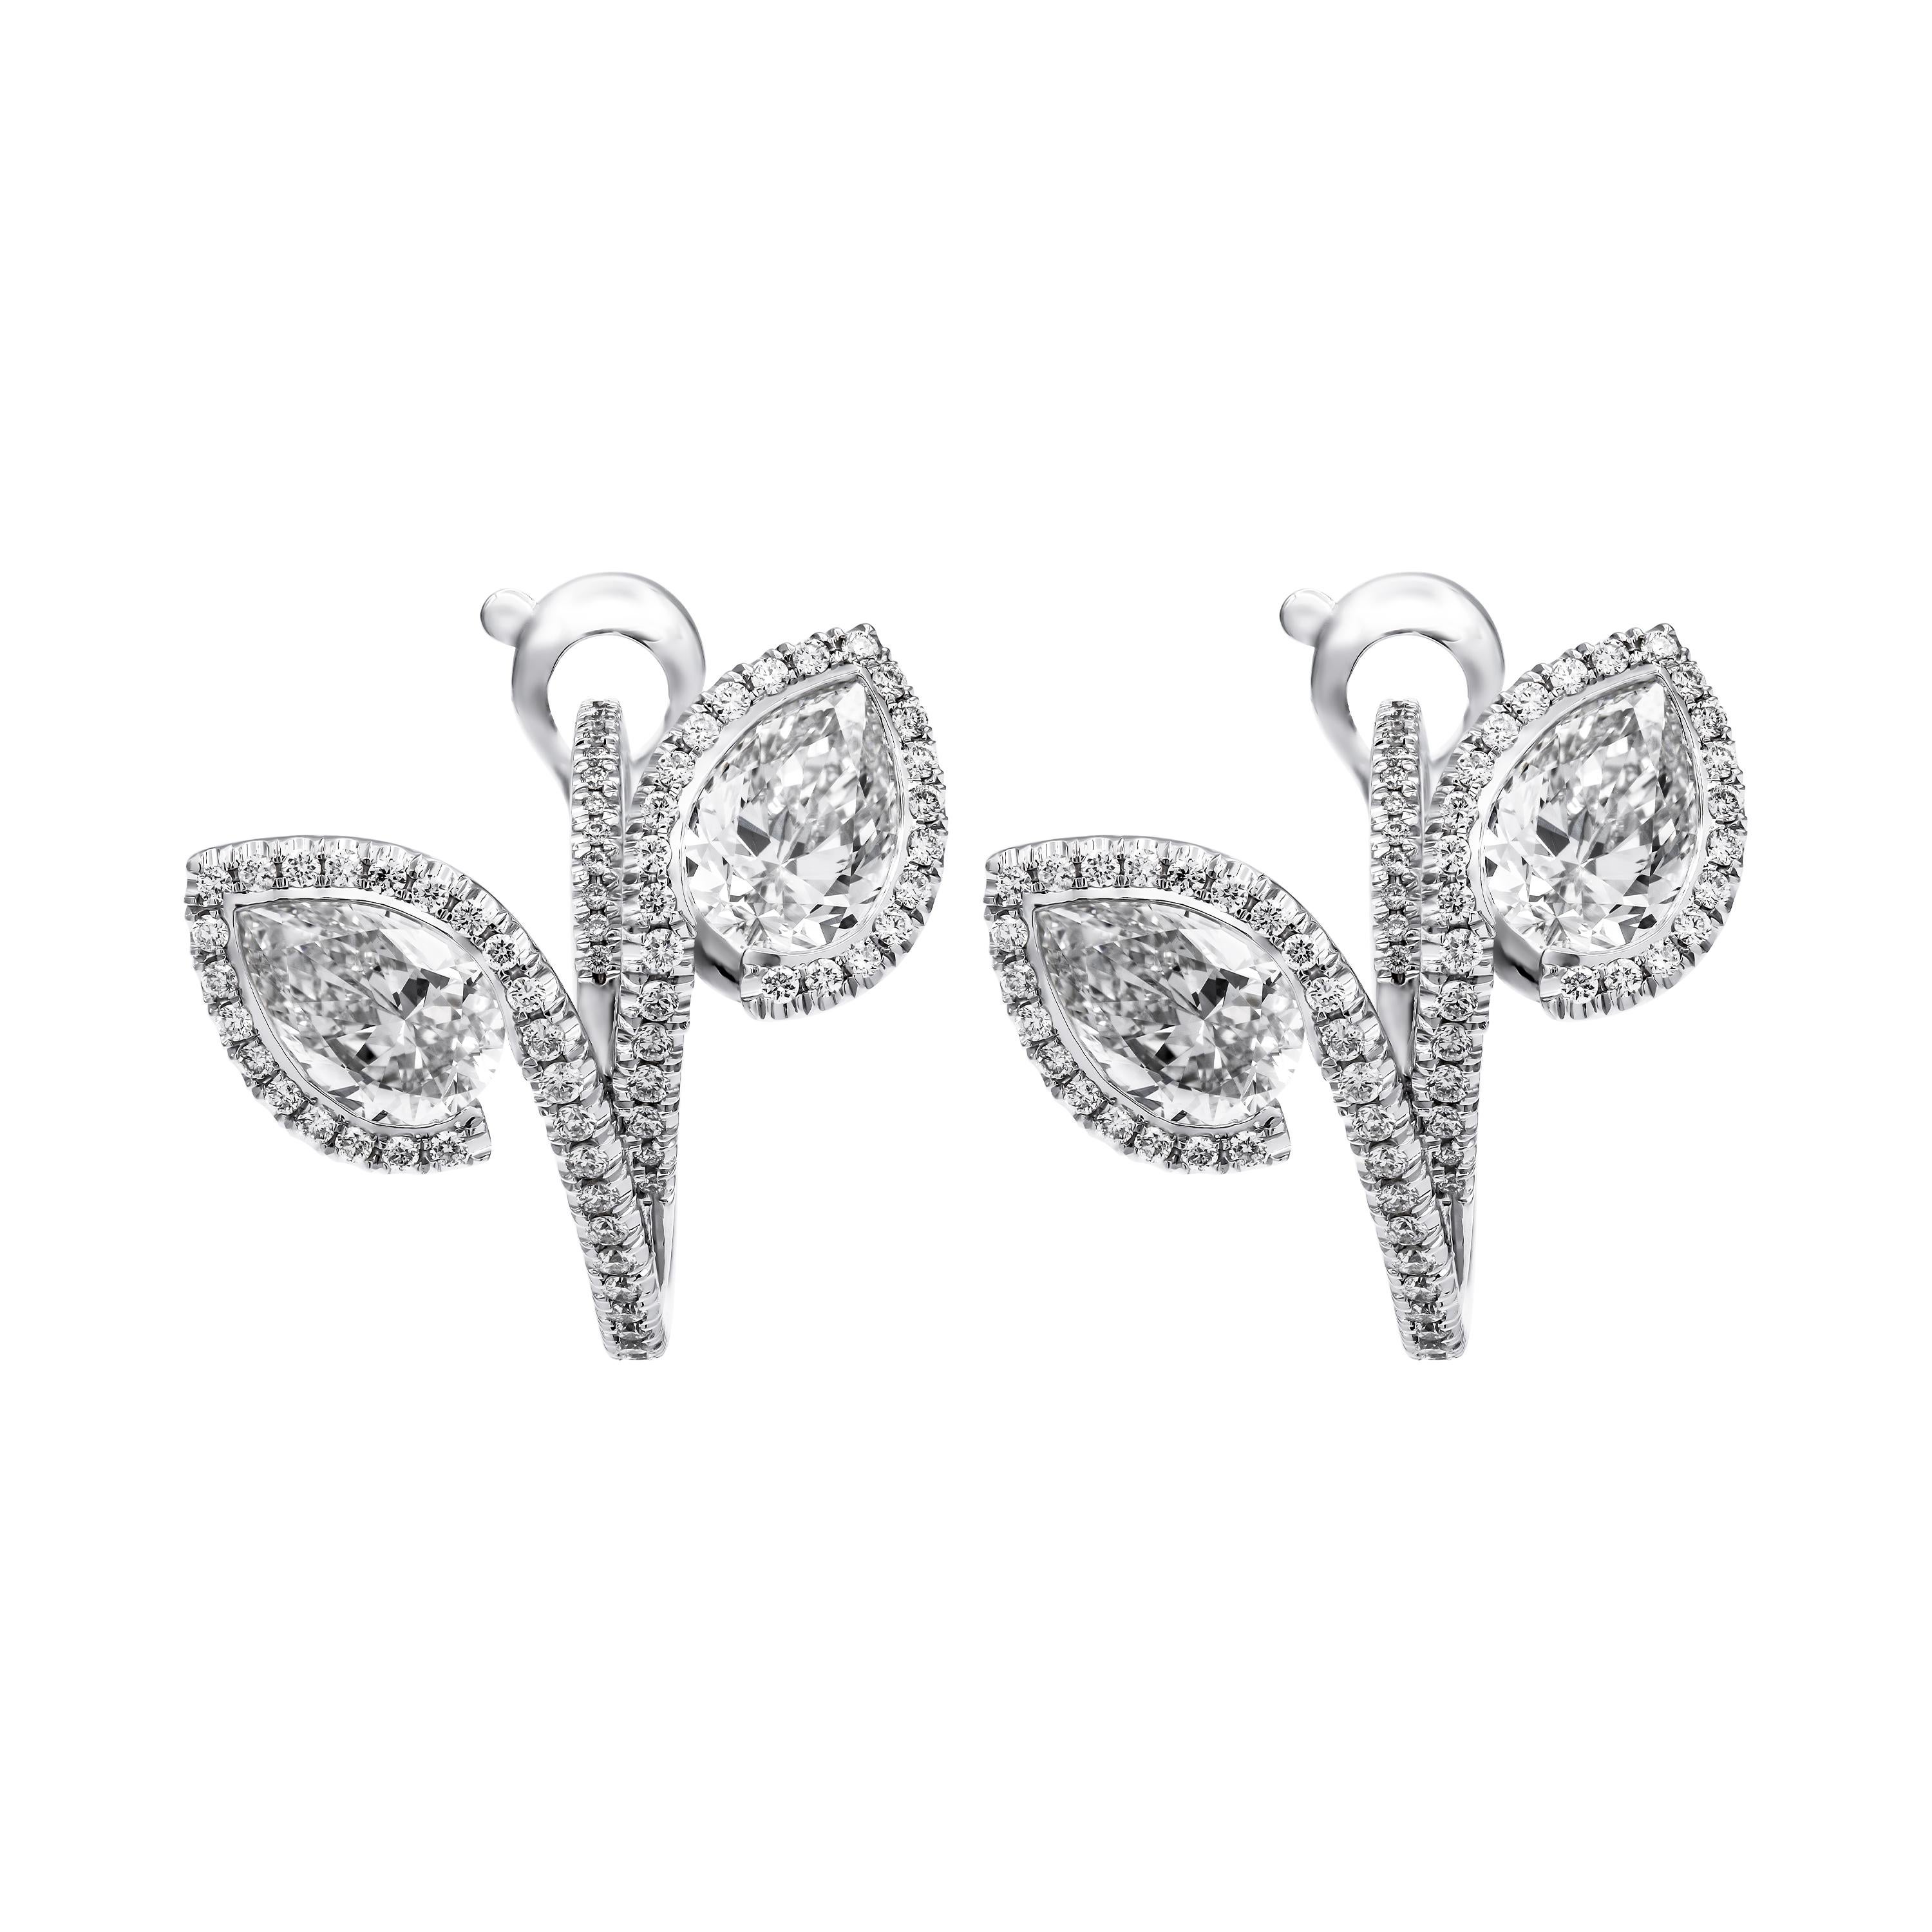 Hoop Earring with 4 GIA Certified Pear Shape diamonds 
Mounted in 18K White Gold featuring exceptional pave work , halo around each stone, encrusted with 1.5ct full cut diamonds G-H color and VS clarity
Stone Details: 
•	0.70ct G VS2 Pear Shape